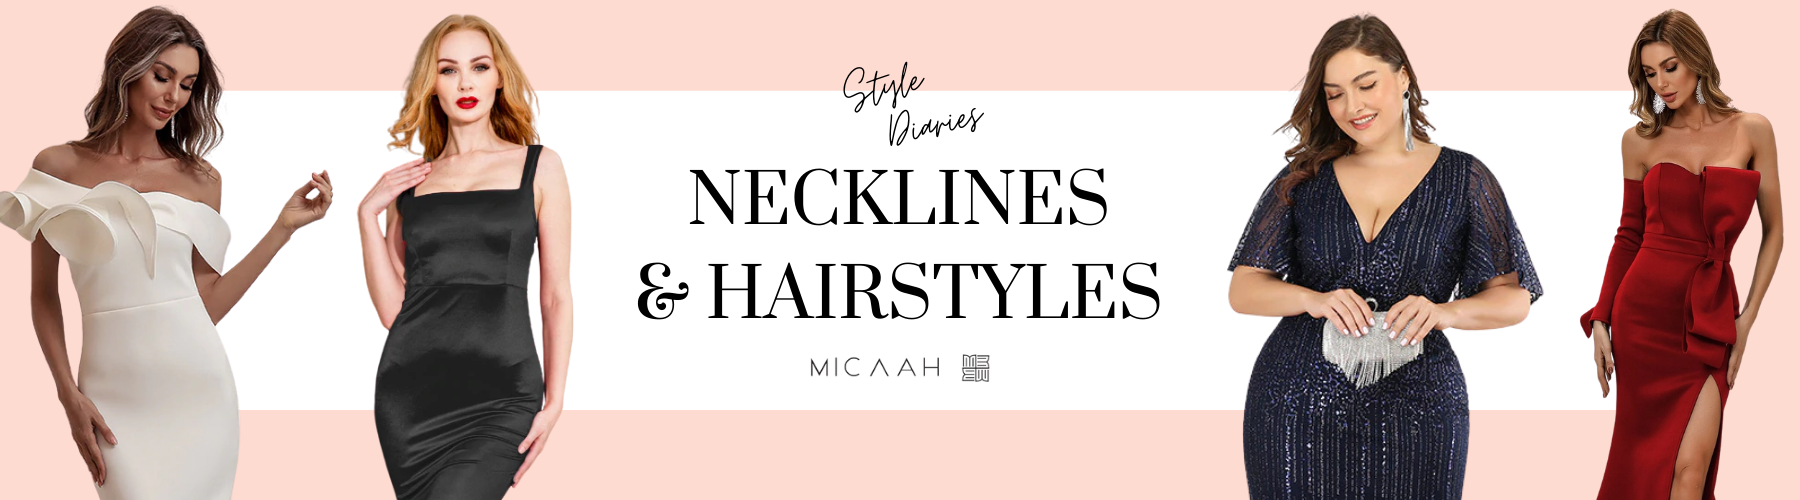 A Simple Guide To Best Hairstyles for Different Wedding Dress Necklines  That You May Not Know About